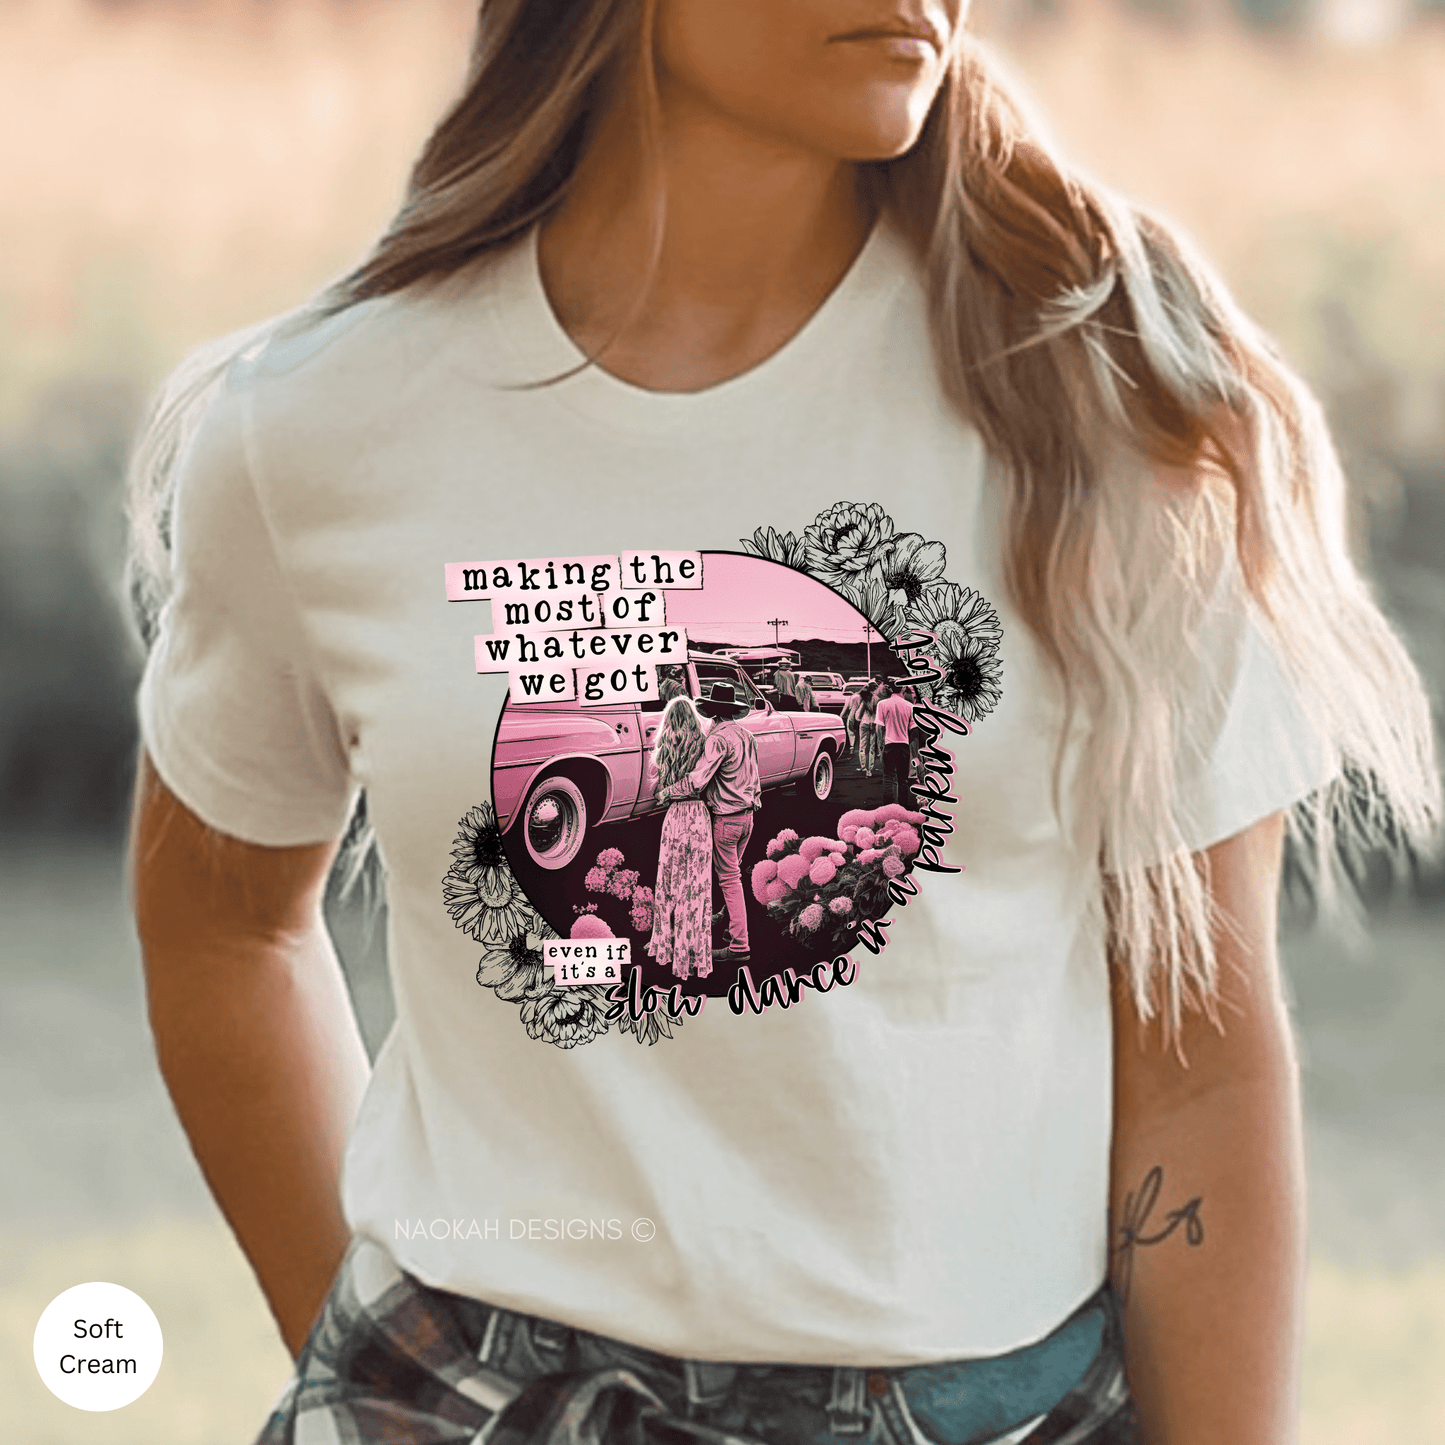 Making The Most Of Whatever We Got Shirt, Even If It's A Slow Dance In A Parking Lot, Boho Cowgirl Shirt, Boho Western Shirt, Cowgirl Shirt